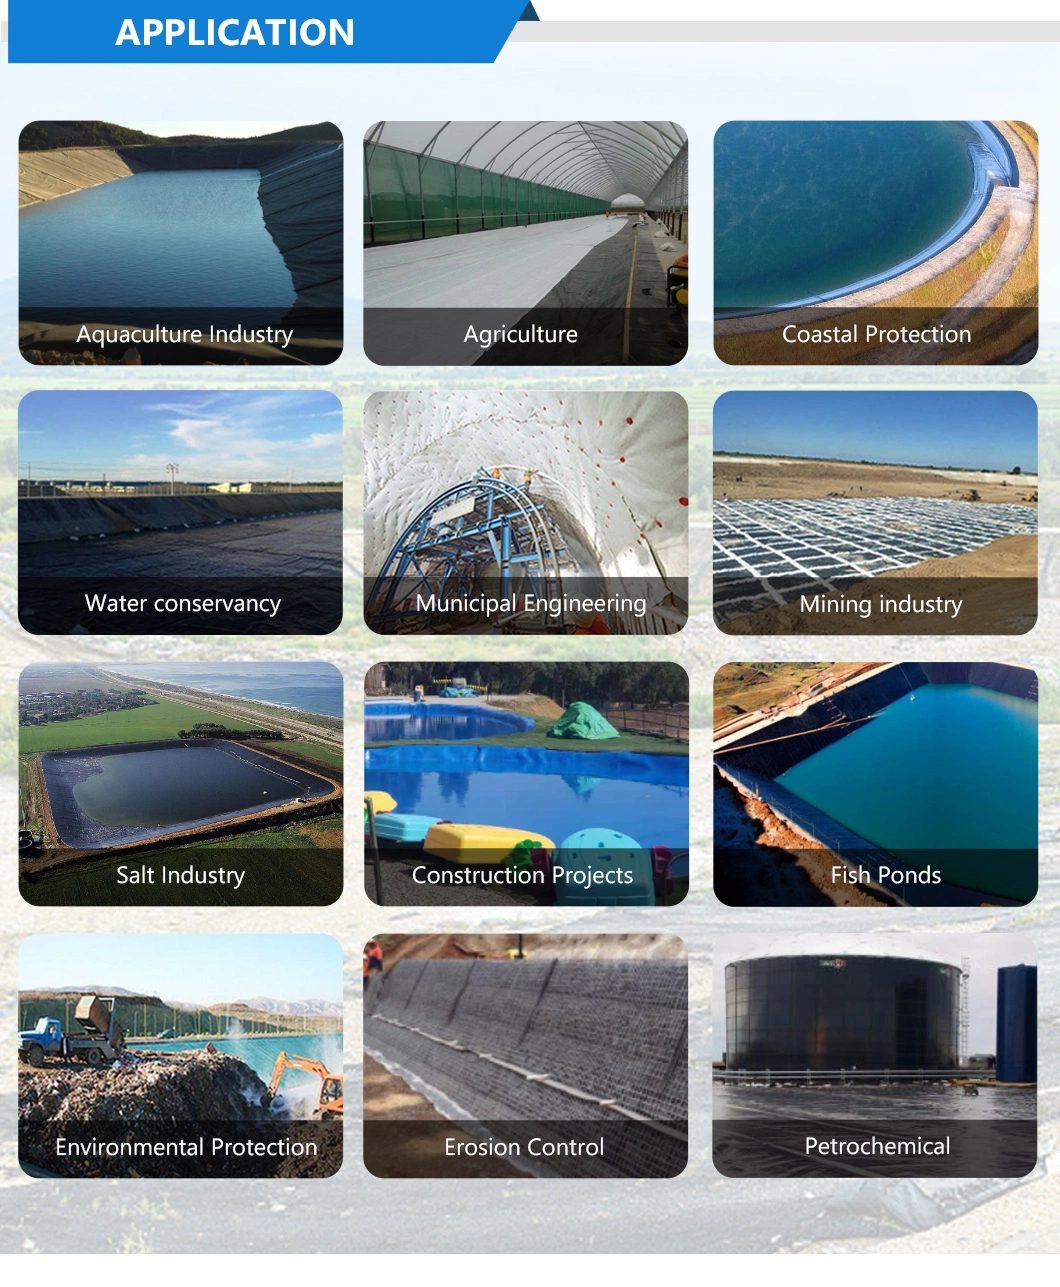 300g-0.6mm-300g Composite Geomembrane with Two Layers Geotextile One Layer Geomembrane for Fish Ponds/Shrimp Ponds/ Oxidation Ponds/Livestock Breeding